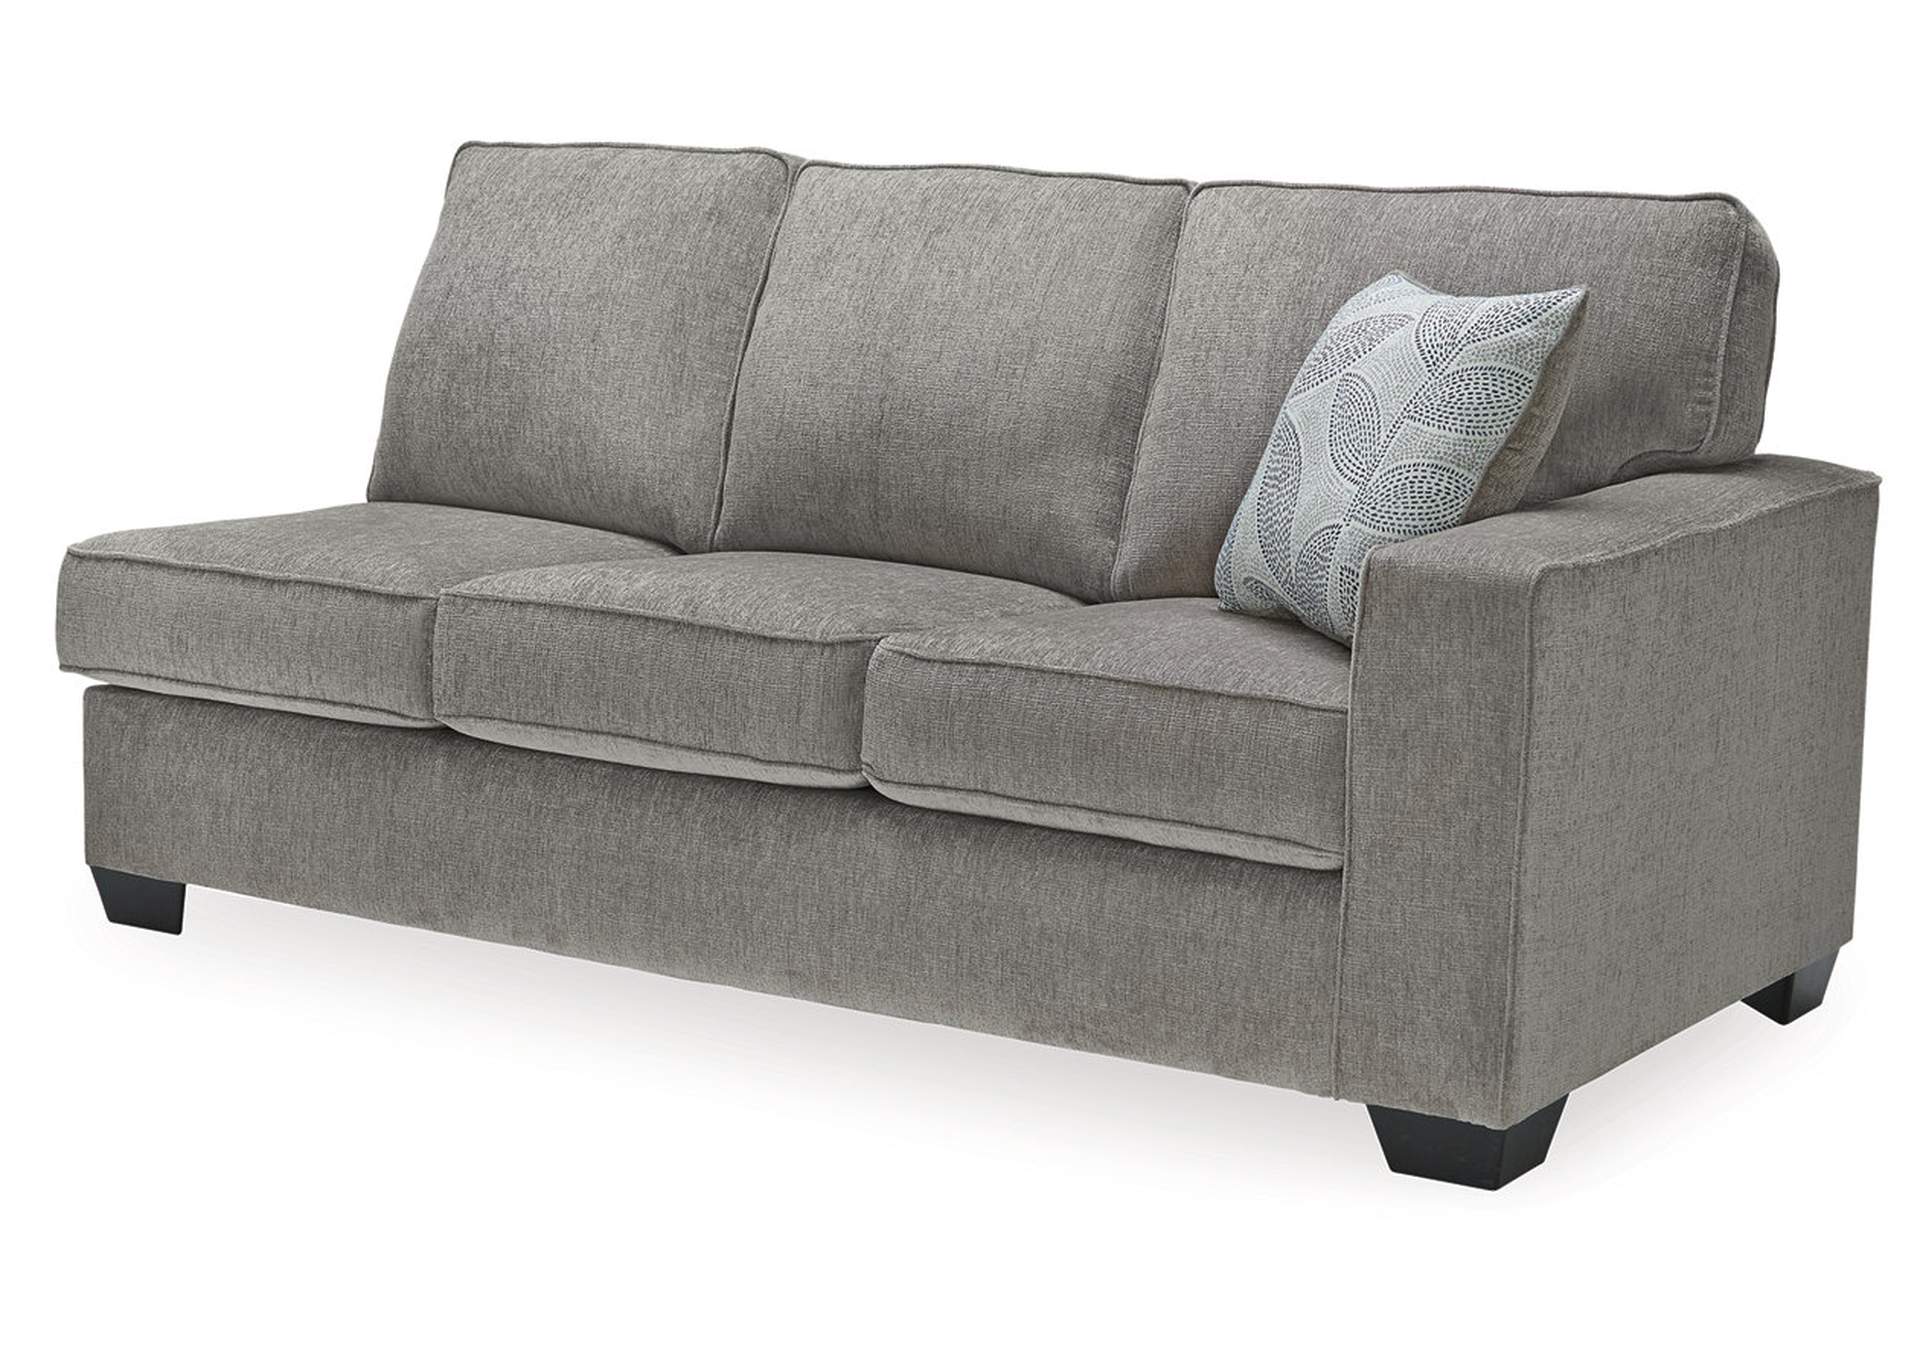 Altari 2-Piece Sleeper Sectional with Chaise,Signature Design By Ashley